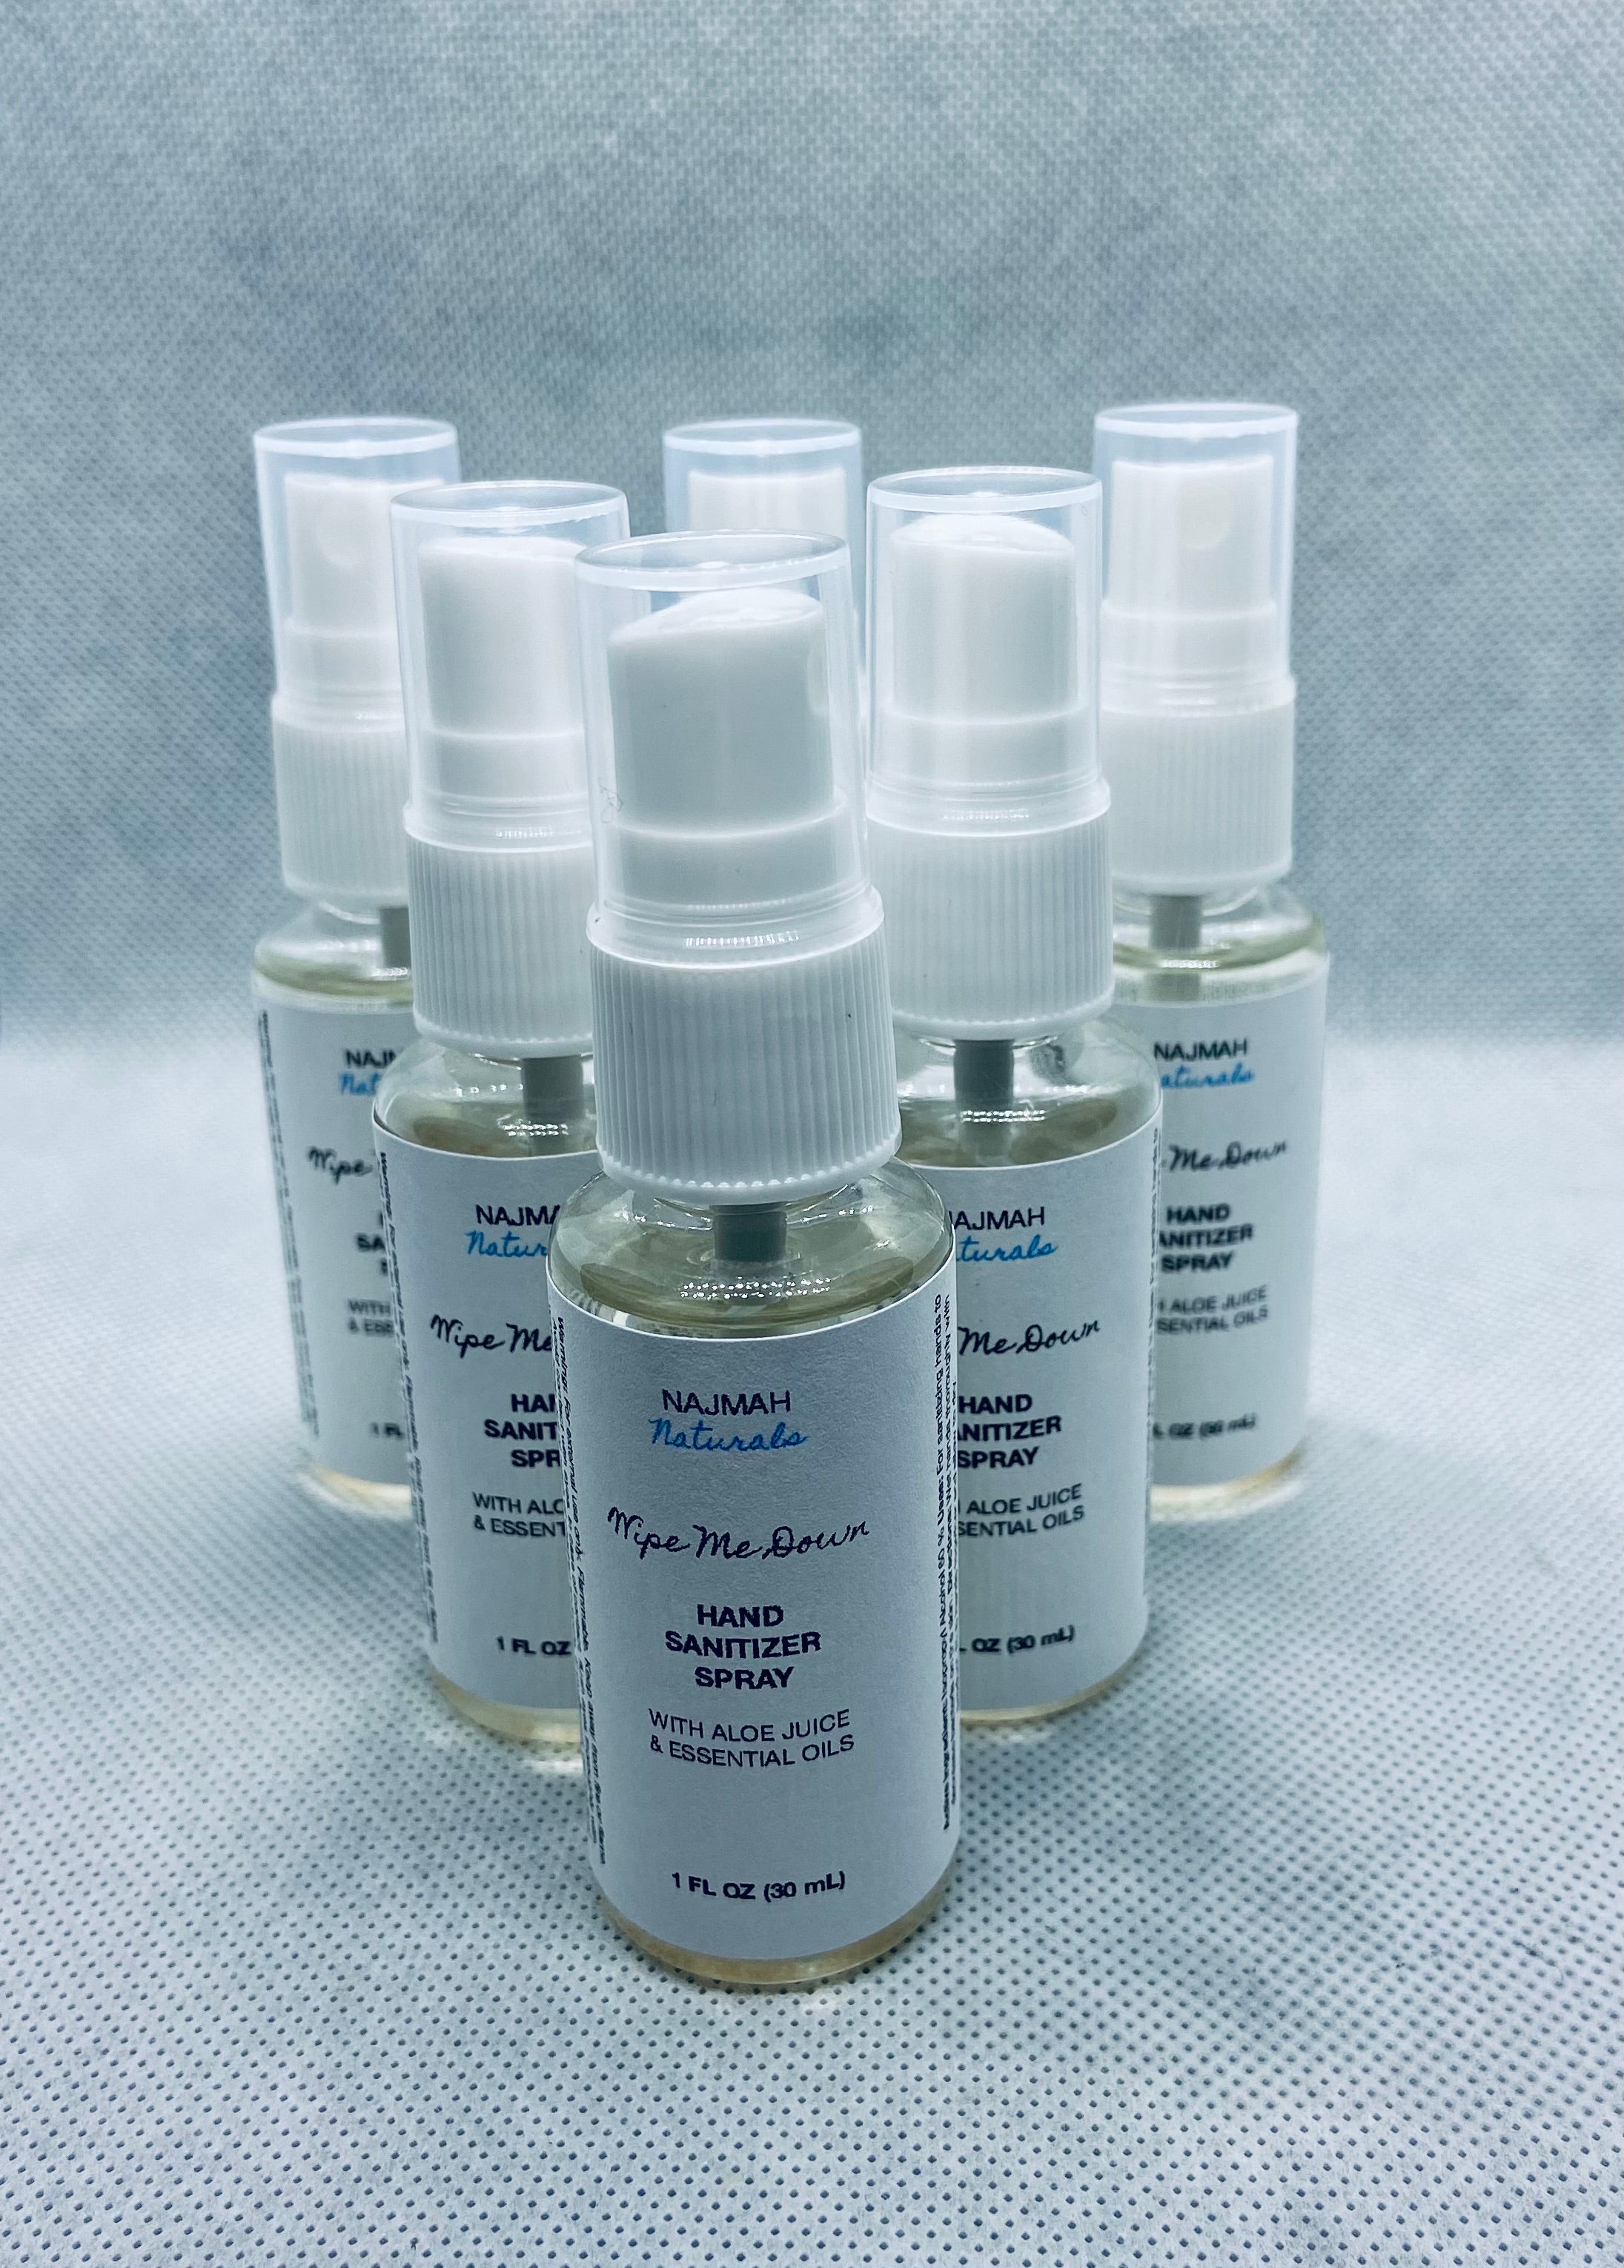 Our Wipe Me Down Hand Sanitizer Spray contains aloe vera juice, 99% isopropyl alcohol, and premium essential oils. This price includes five 1 ounce spray bottles. They are the perfect size to toss in your pocket or bag before you leave the house. 